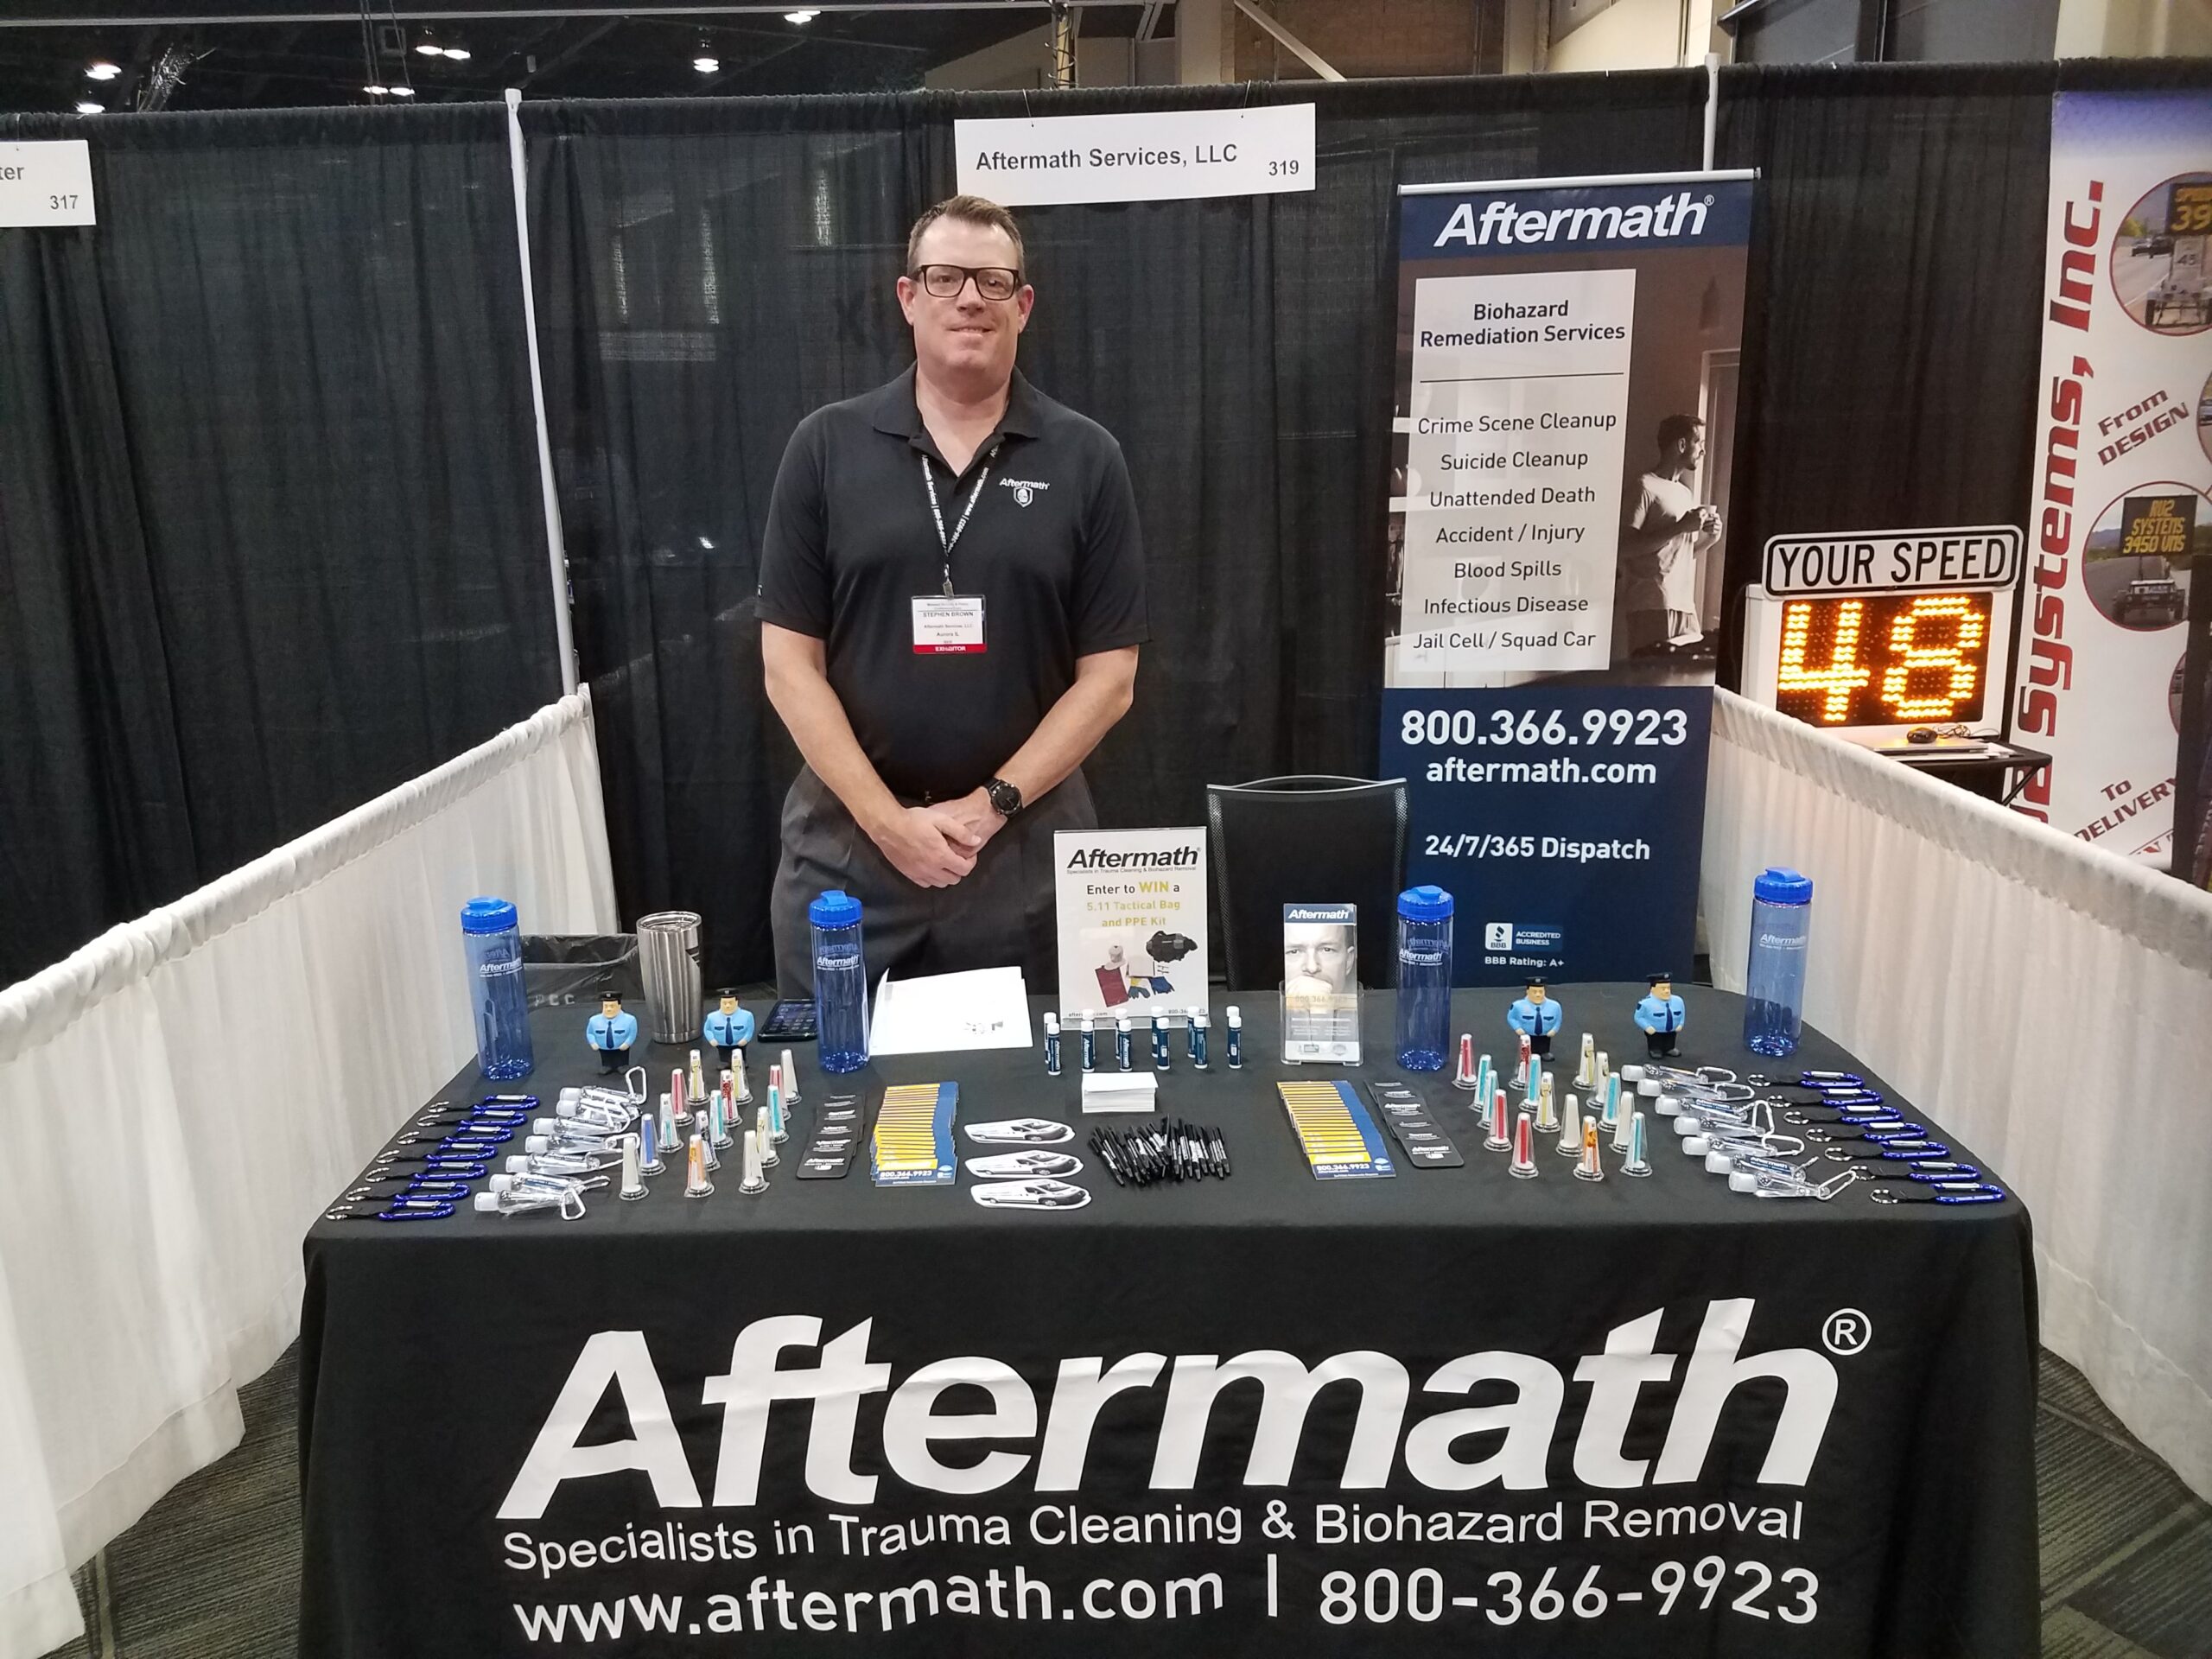 Aftermath booth at MSPCE Conference.